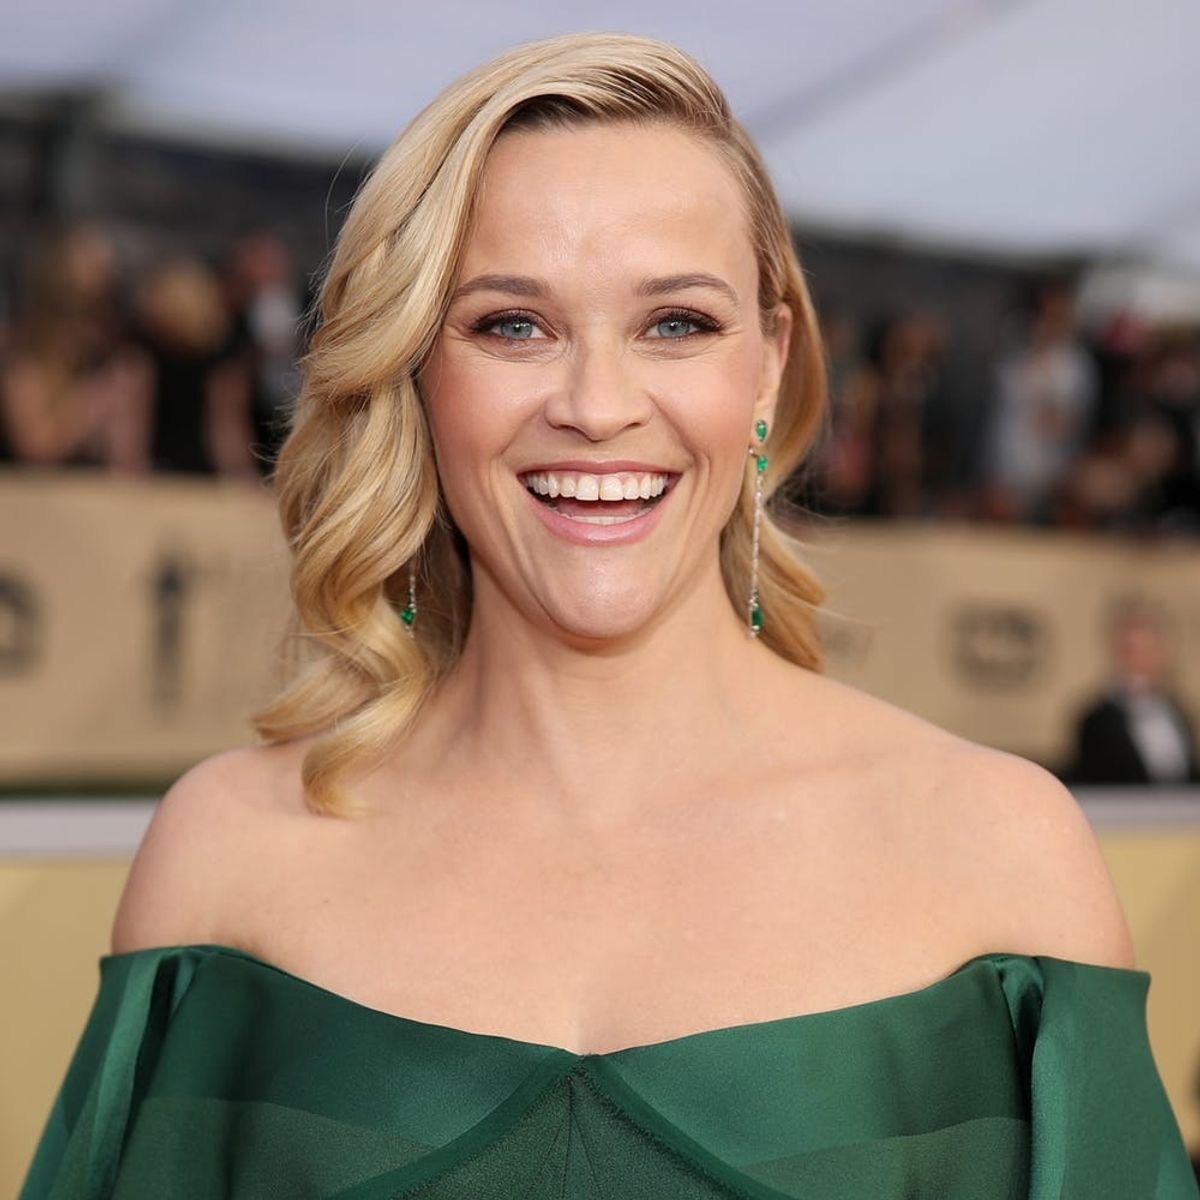 Reese Witherspoon Has a New Show That’s Unlike Anything She’s Done Before